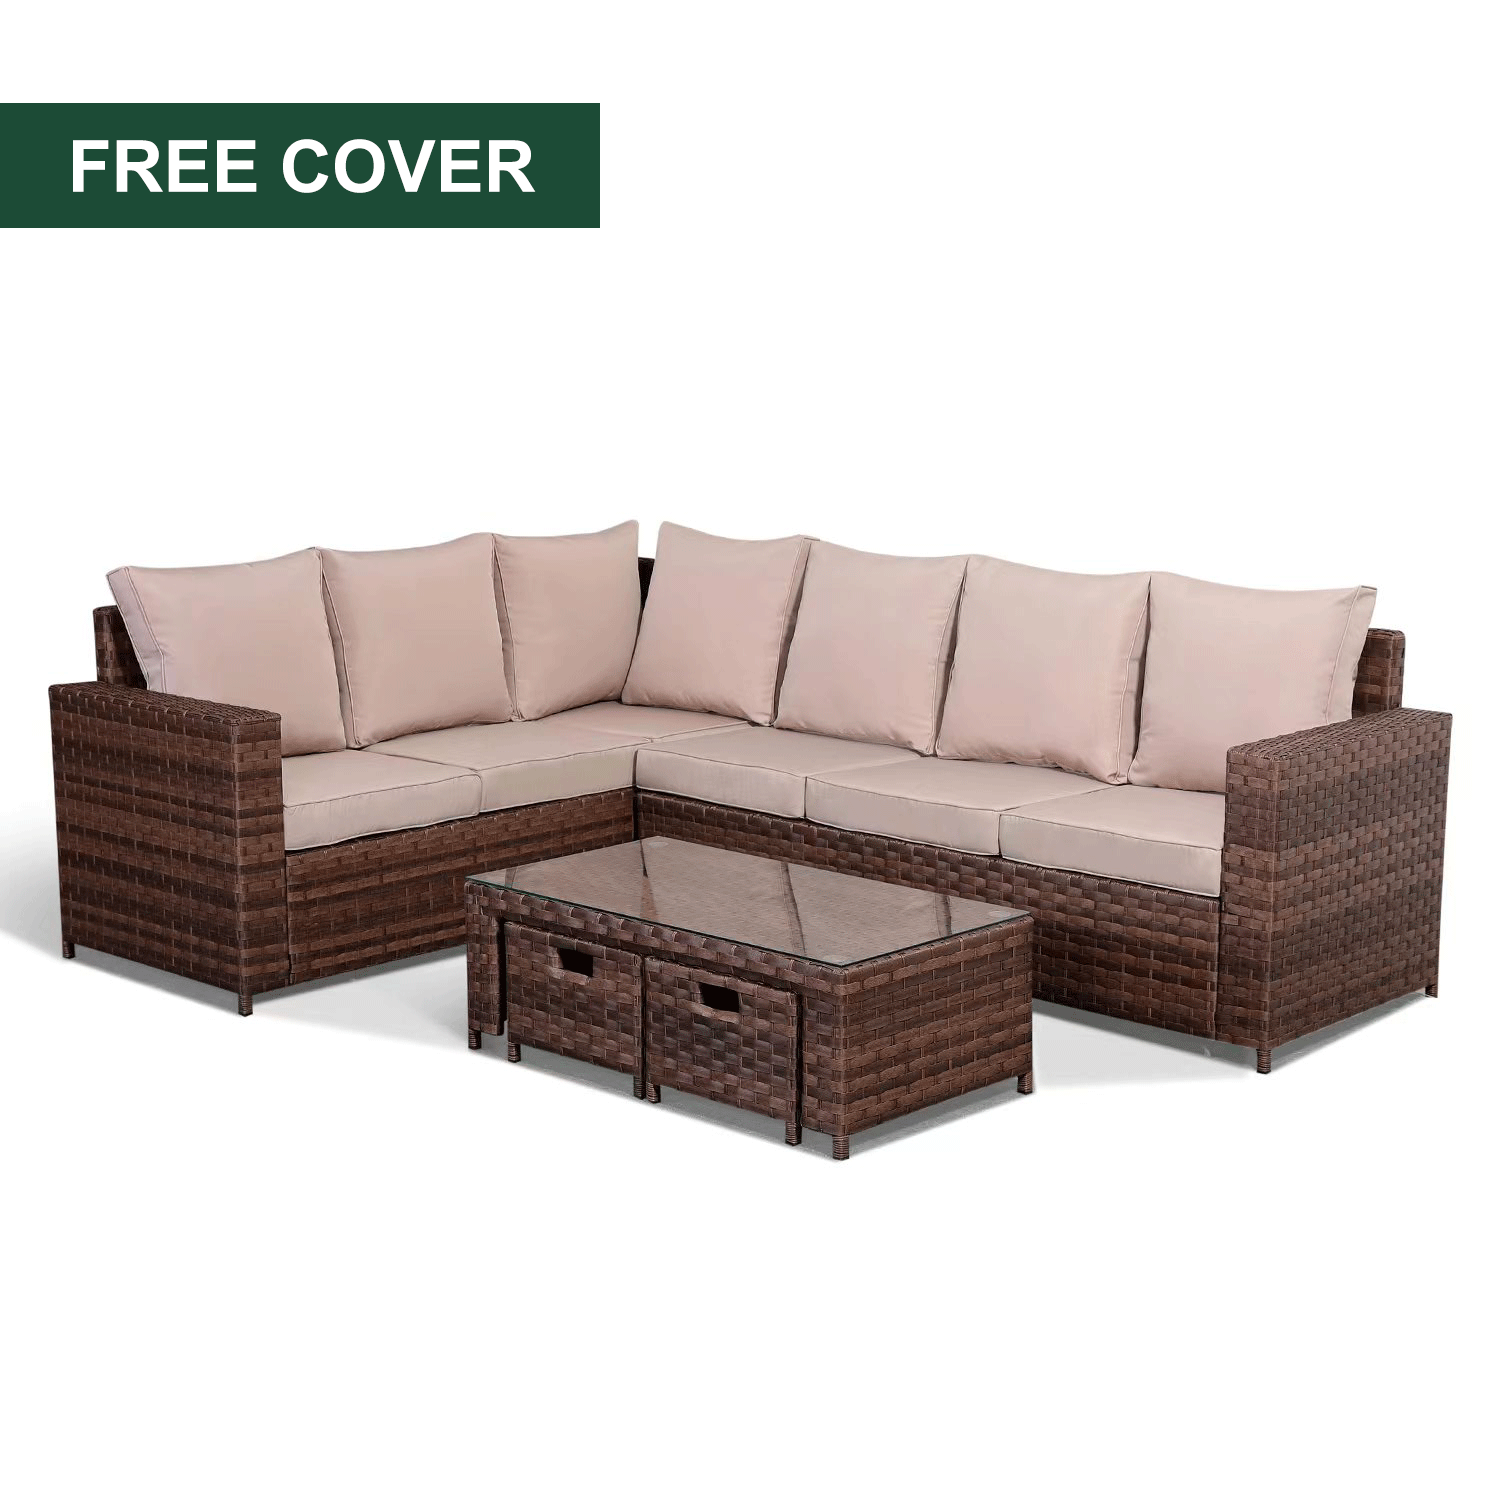 Canna Range High Back LHF Large Corner Sofa Set With Coffee Table In Large Brown Weave